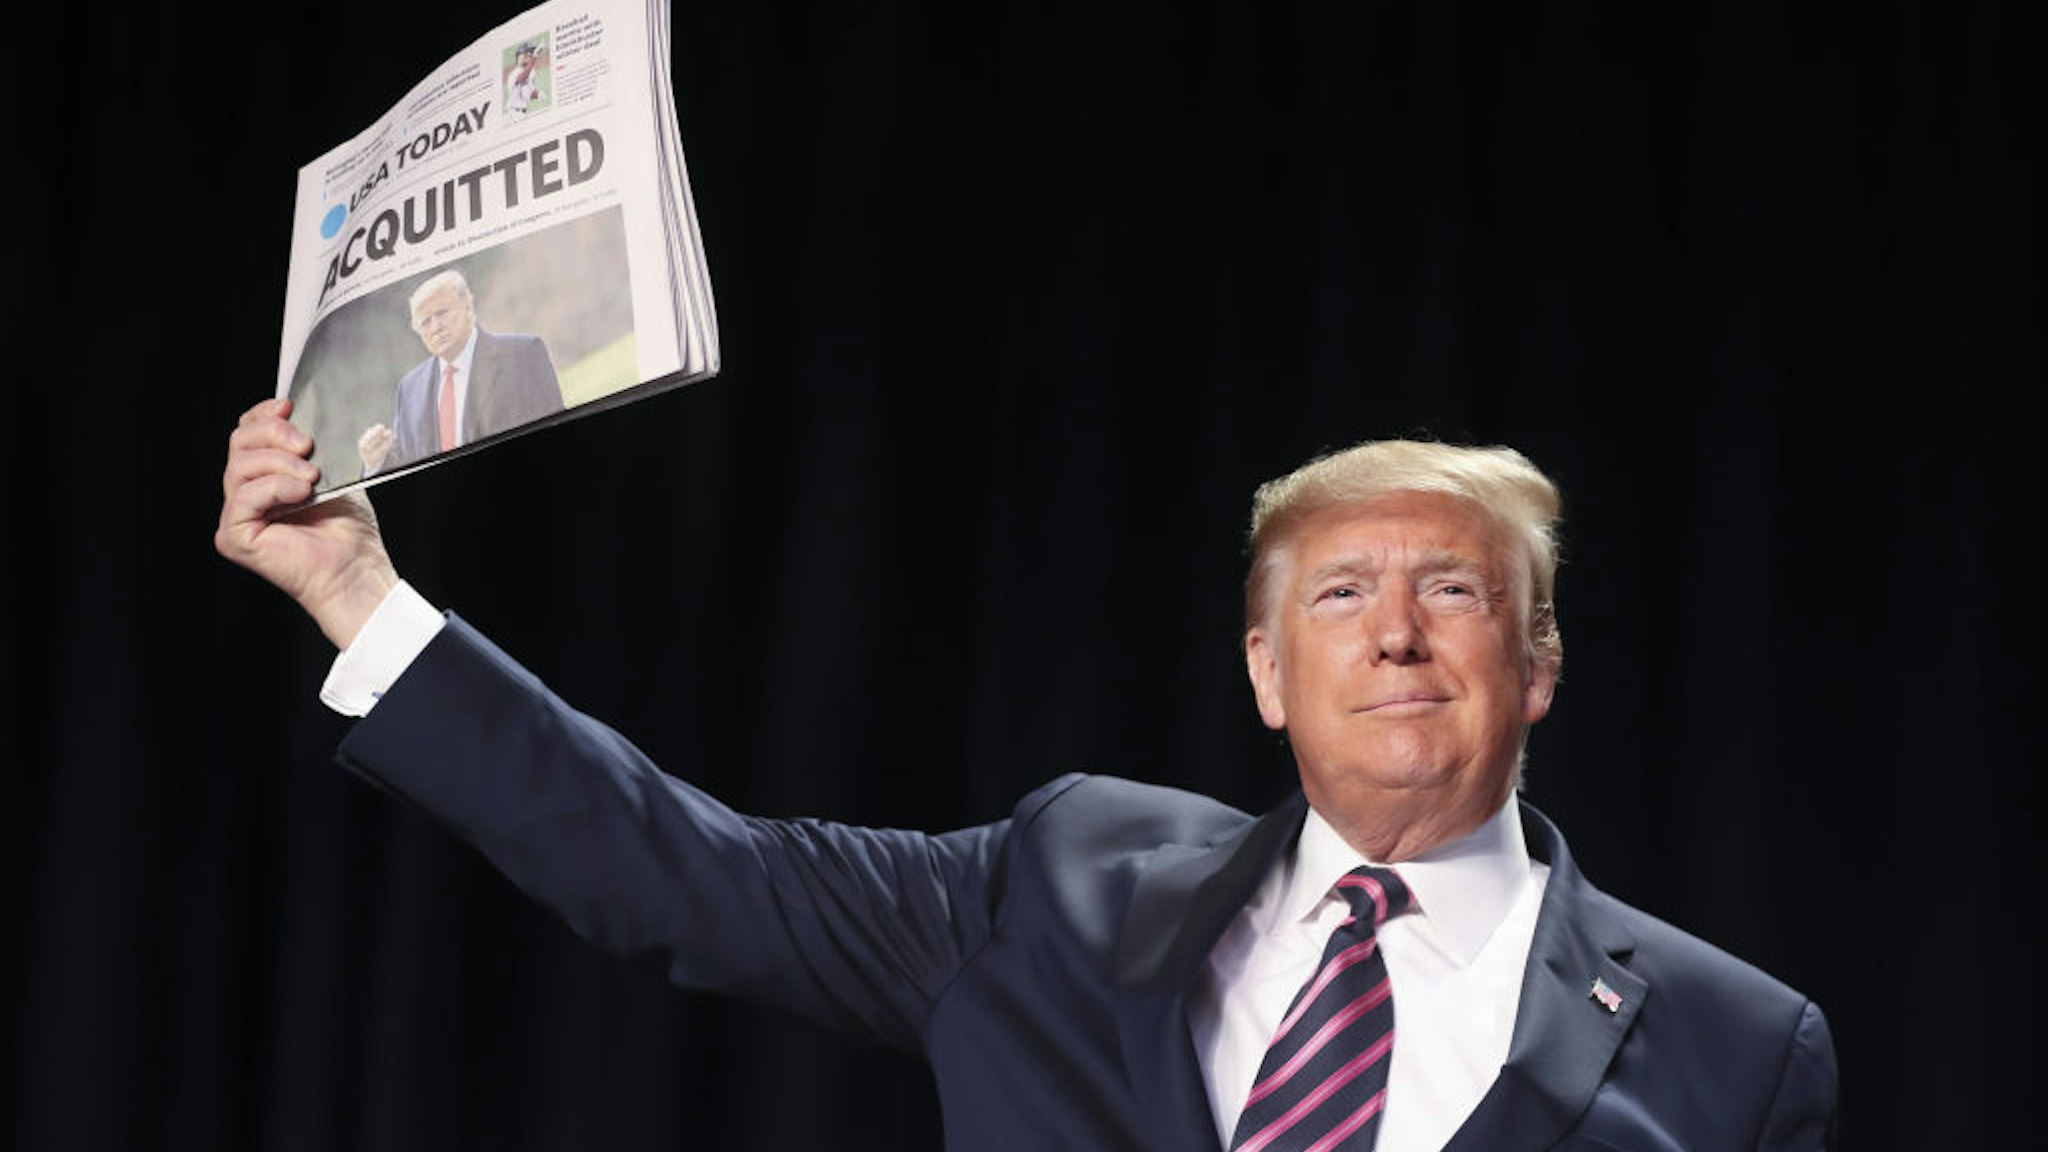 U.S. President Donald Trump holds up a copy of USA Today newspaper with a banner headline that reads "Acquitted" as he arrives to annual National Prayer Breakfast at the Washington Hilton in Washington, D.C., U.S., on Thursday, Feb. 6, 2020. Trump used the annual National Prayer Breakfast Thursday to attack his political enemies after his partisan acquittal of impeachment charges. Photographer: Oliver Contreras/Sipa/Bloomberg